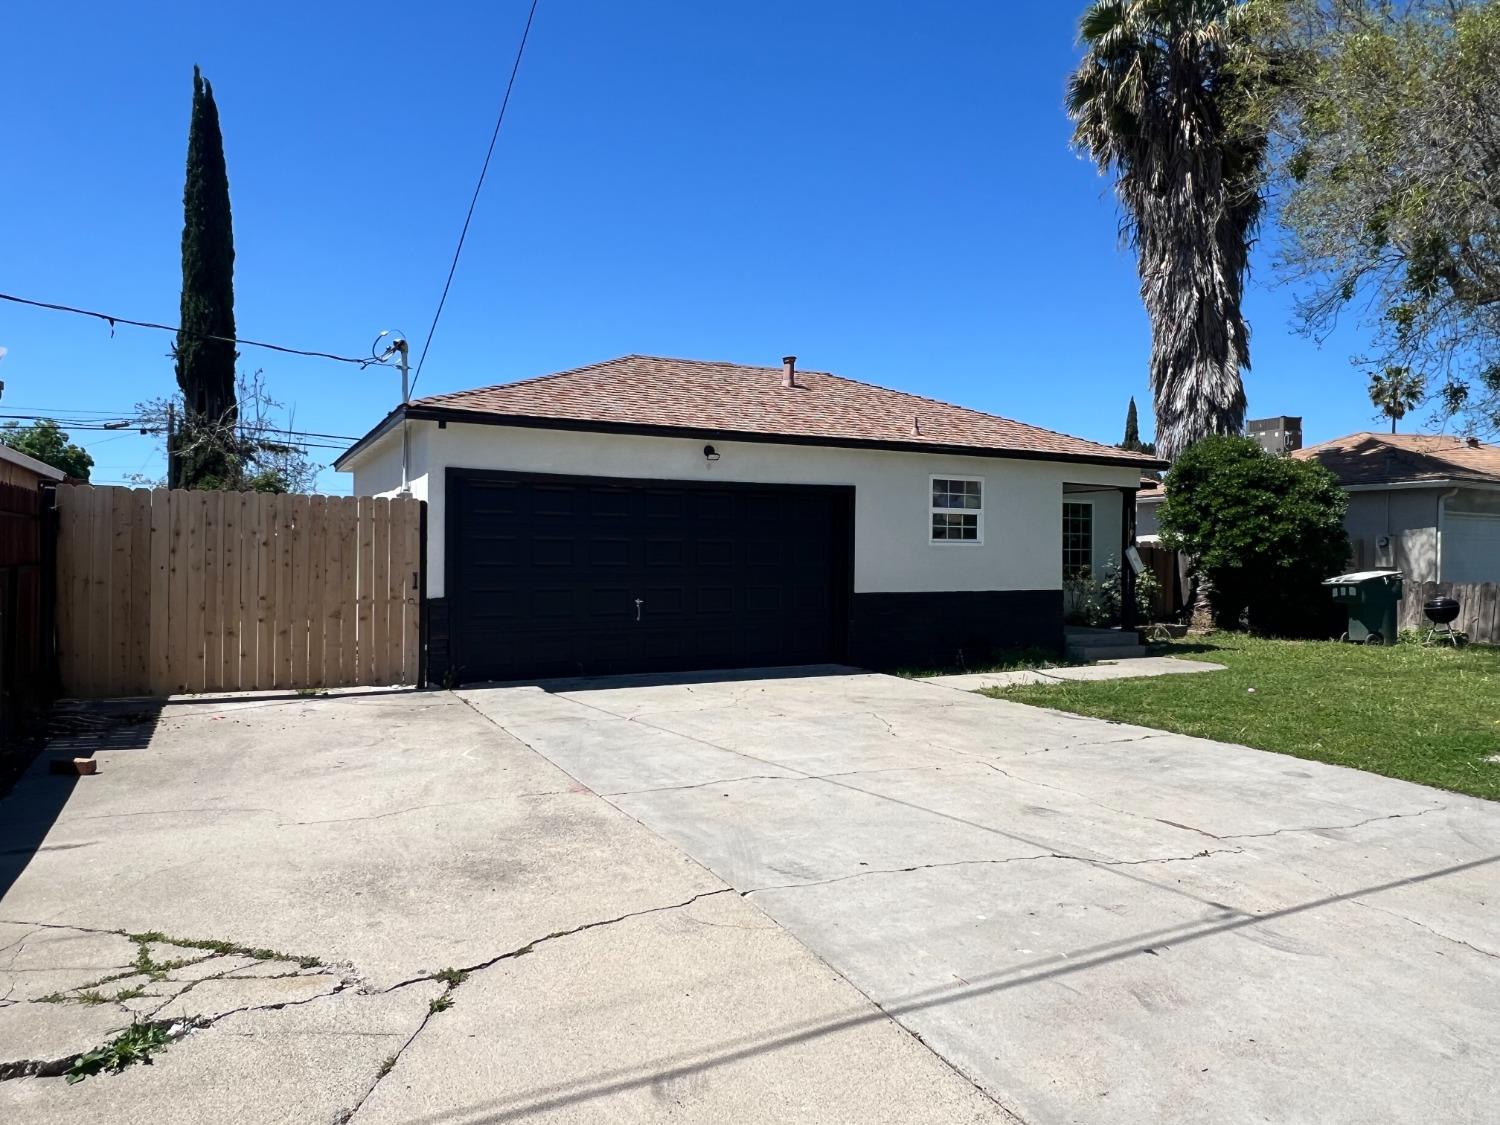 Photo of 2417 Louise Ave in Ceres, CA